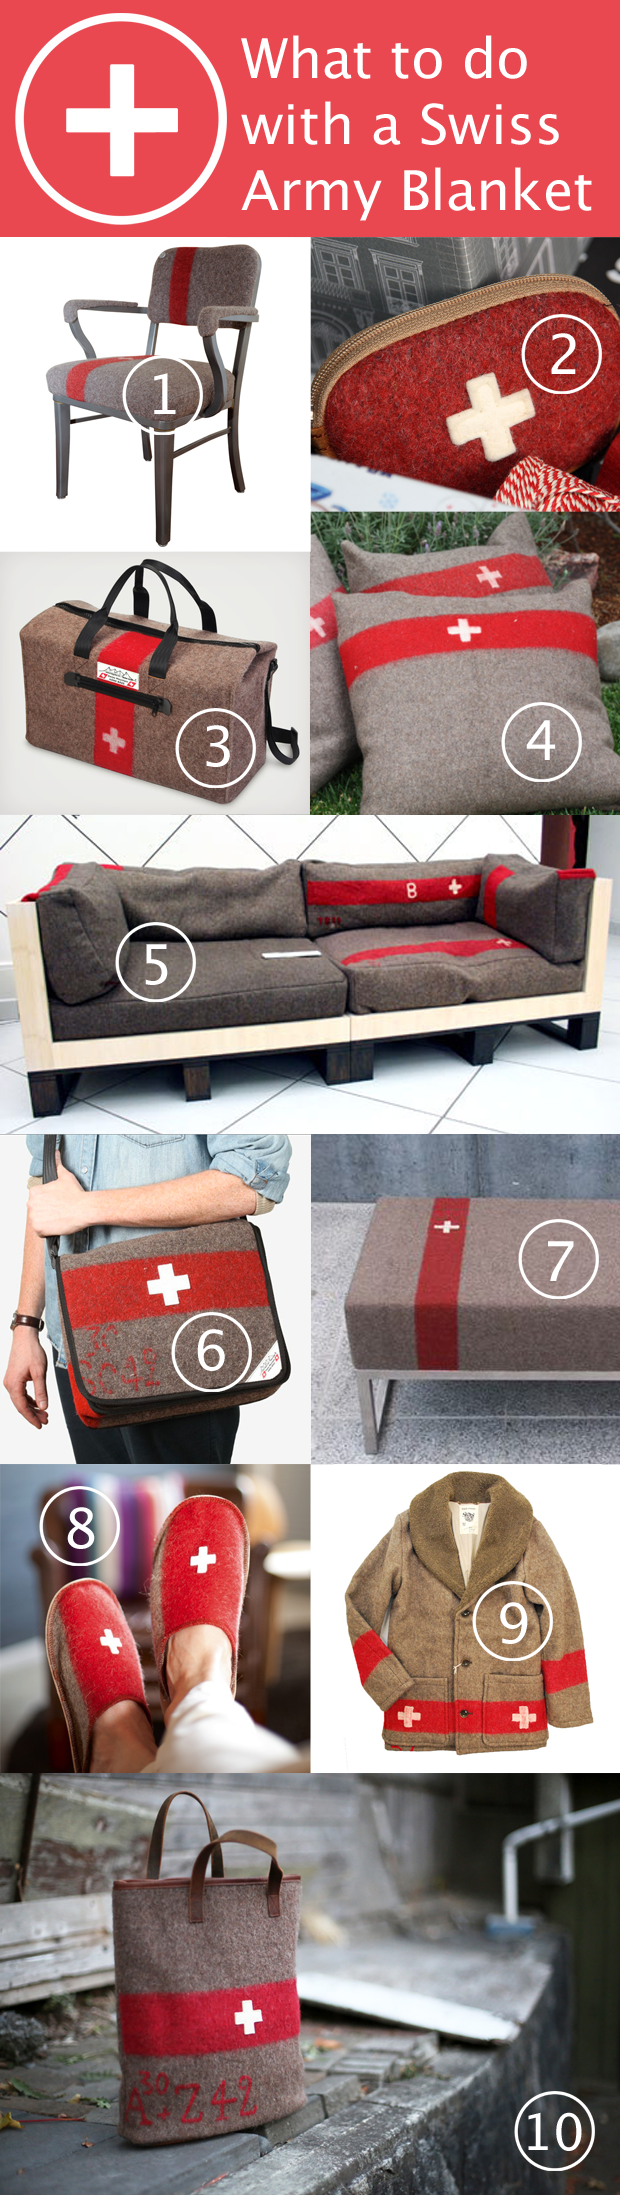 What to do with a Swiss Army blanket | HandsOccupied.com